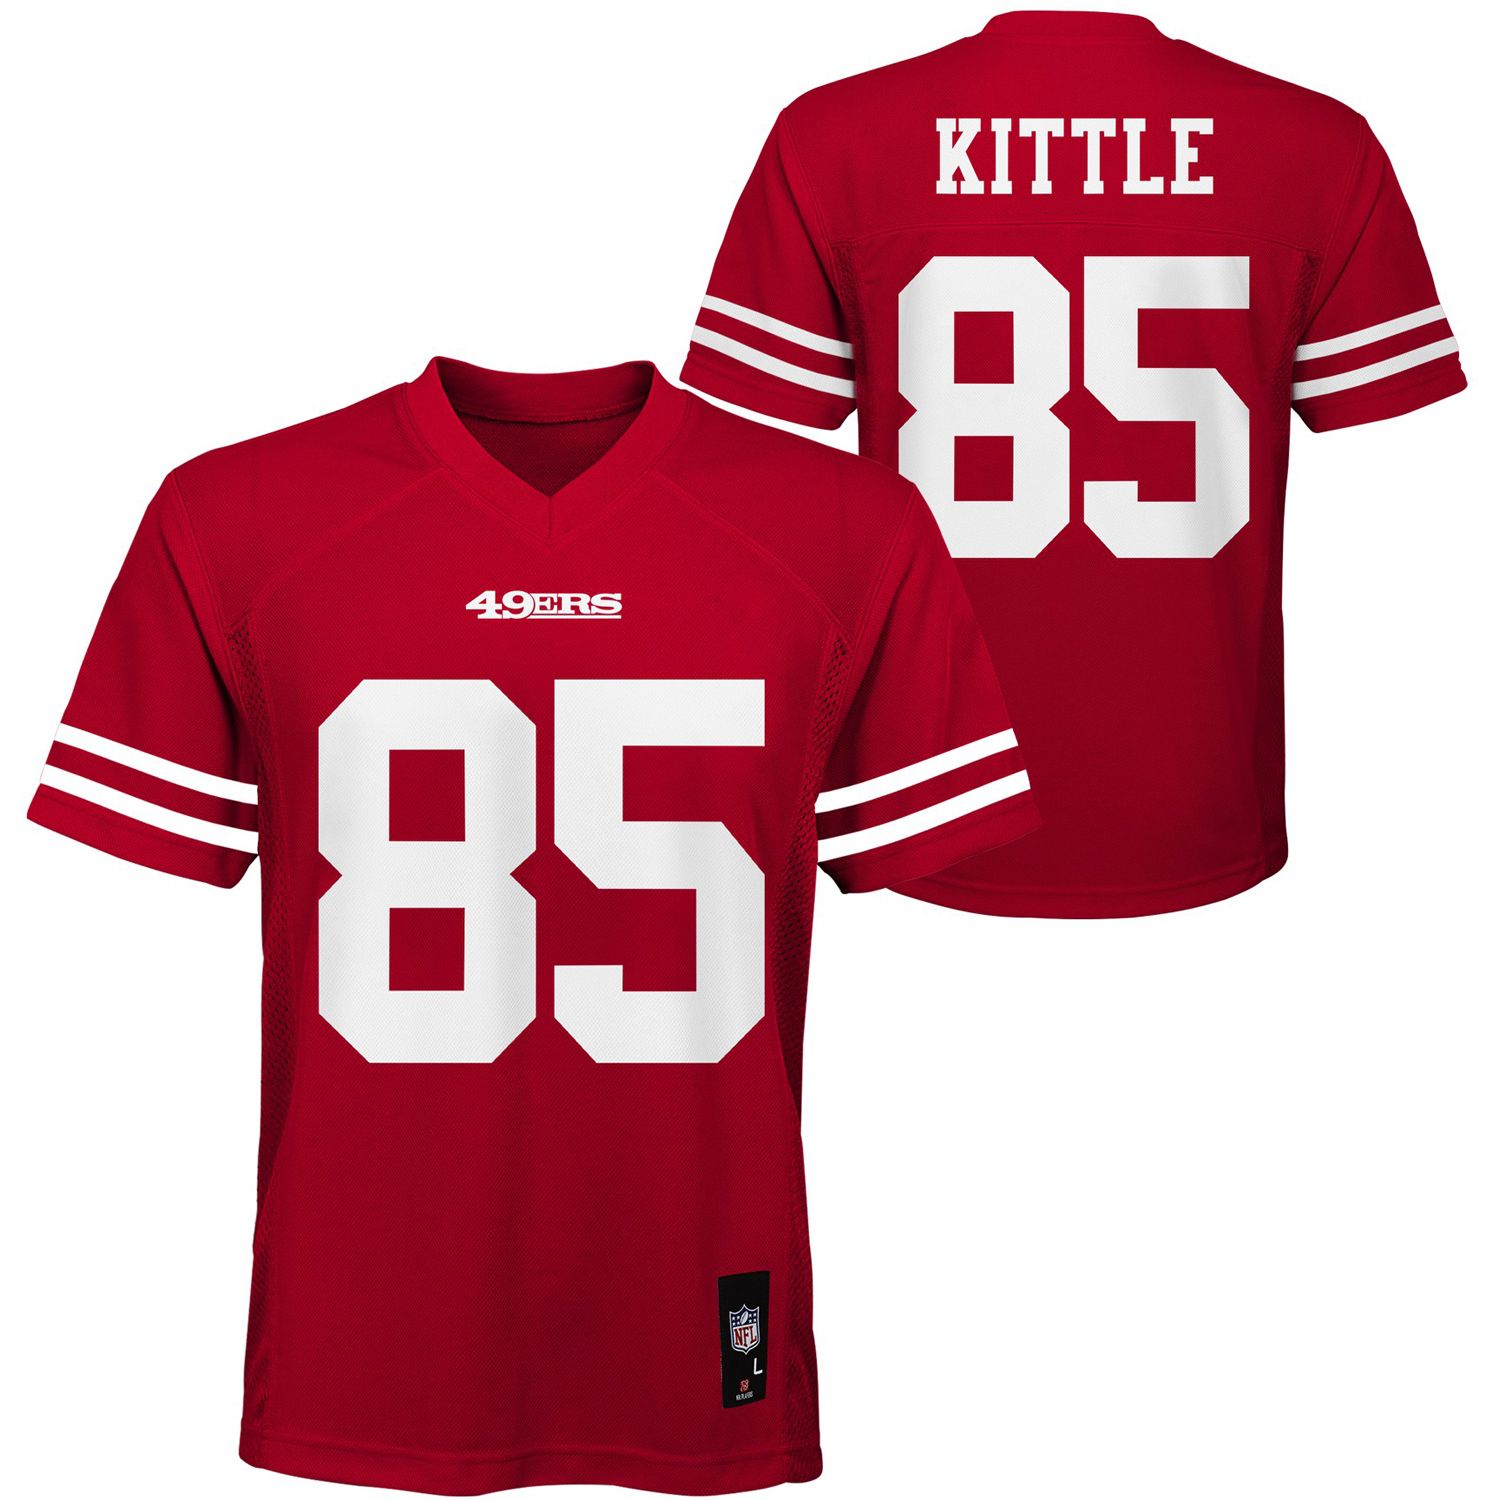 george kittle jersey signed